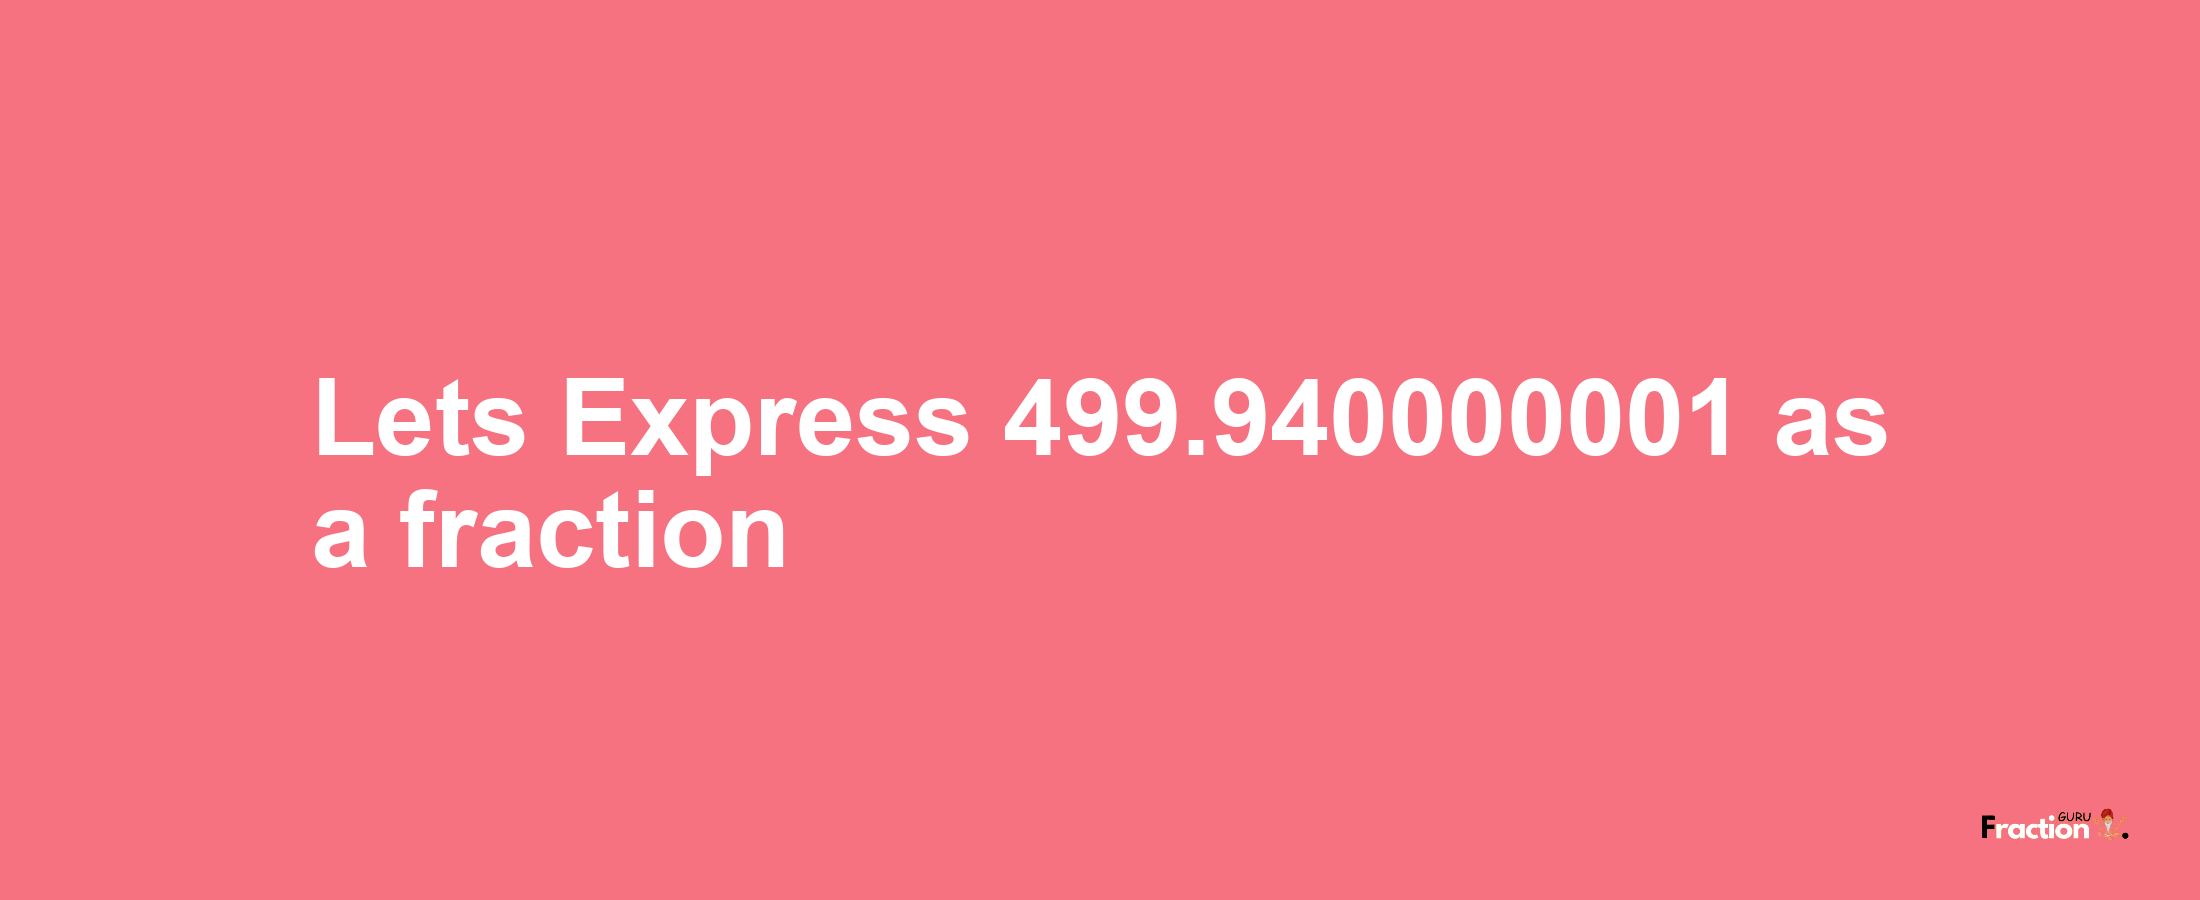 Lets Express 499.940000001 as afraction